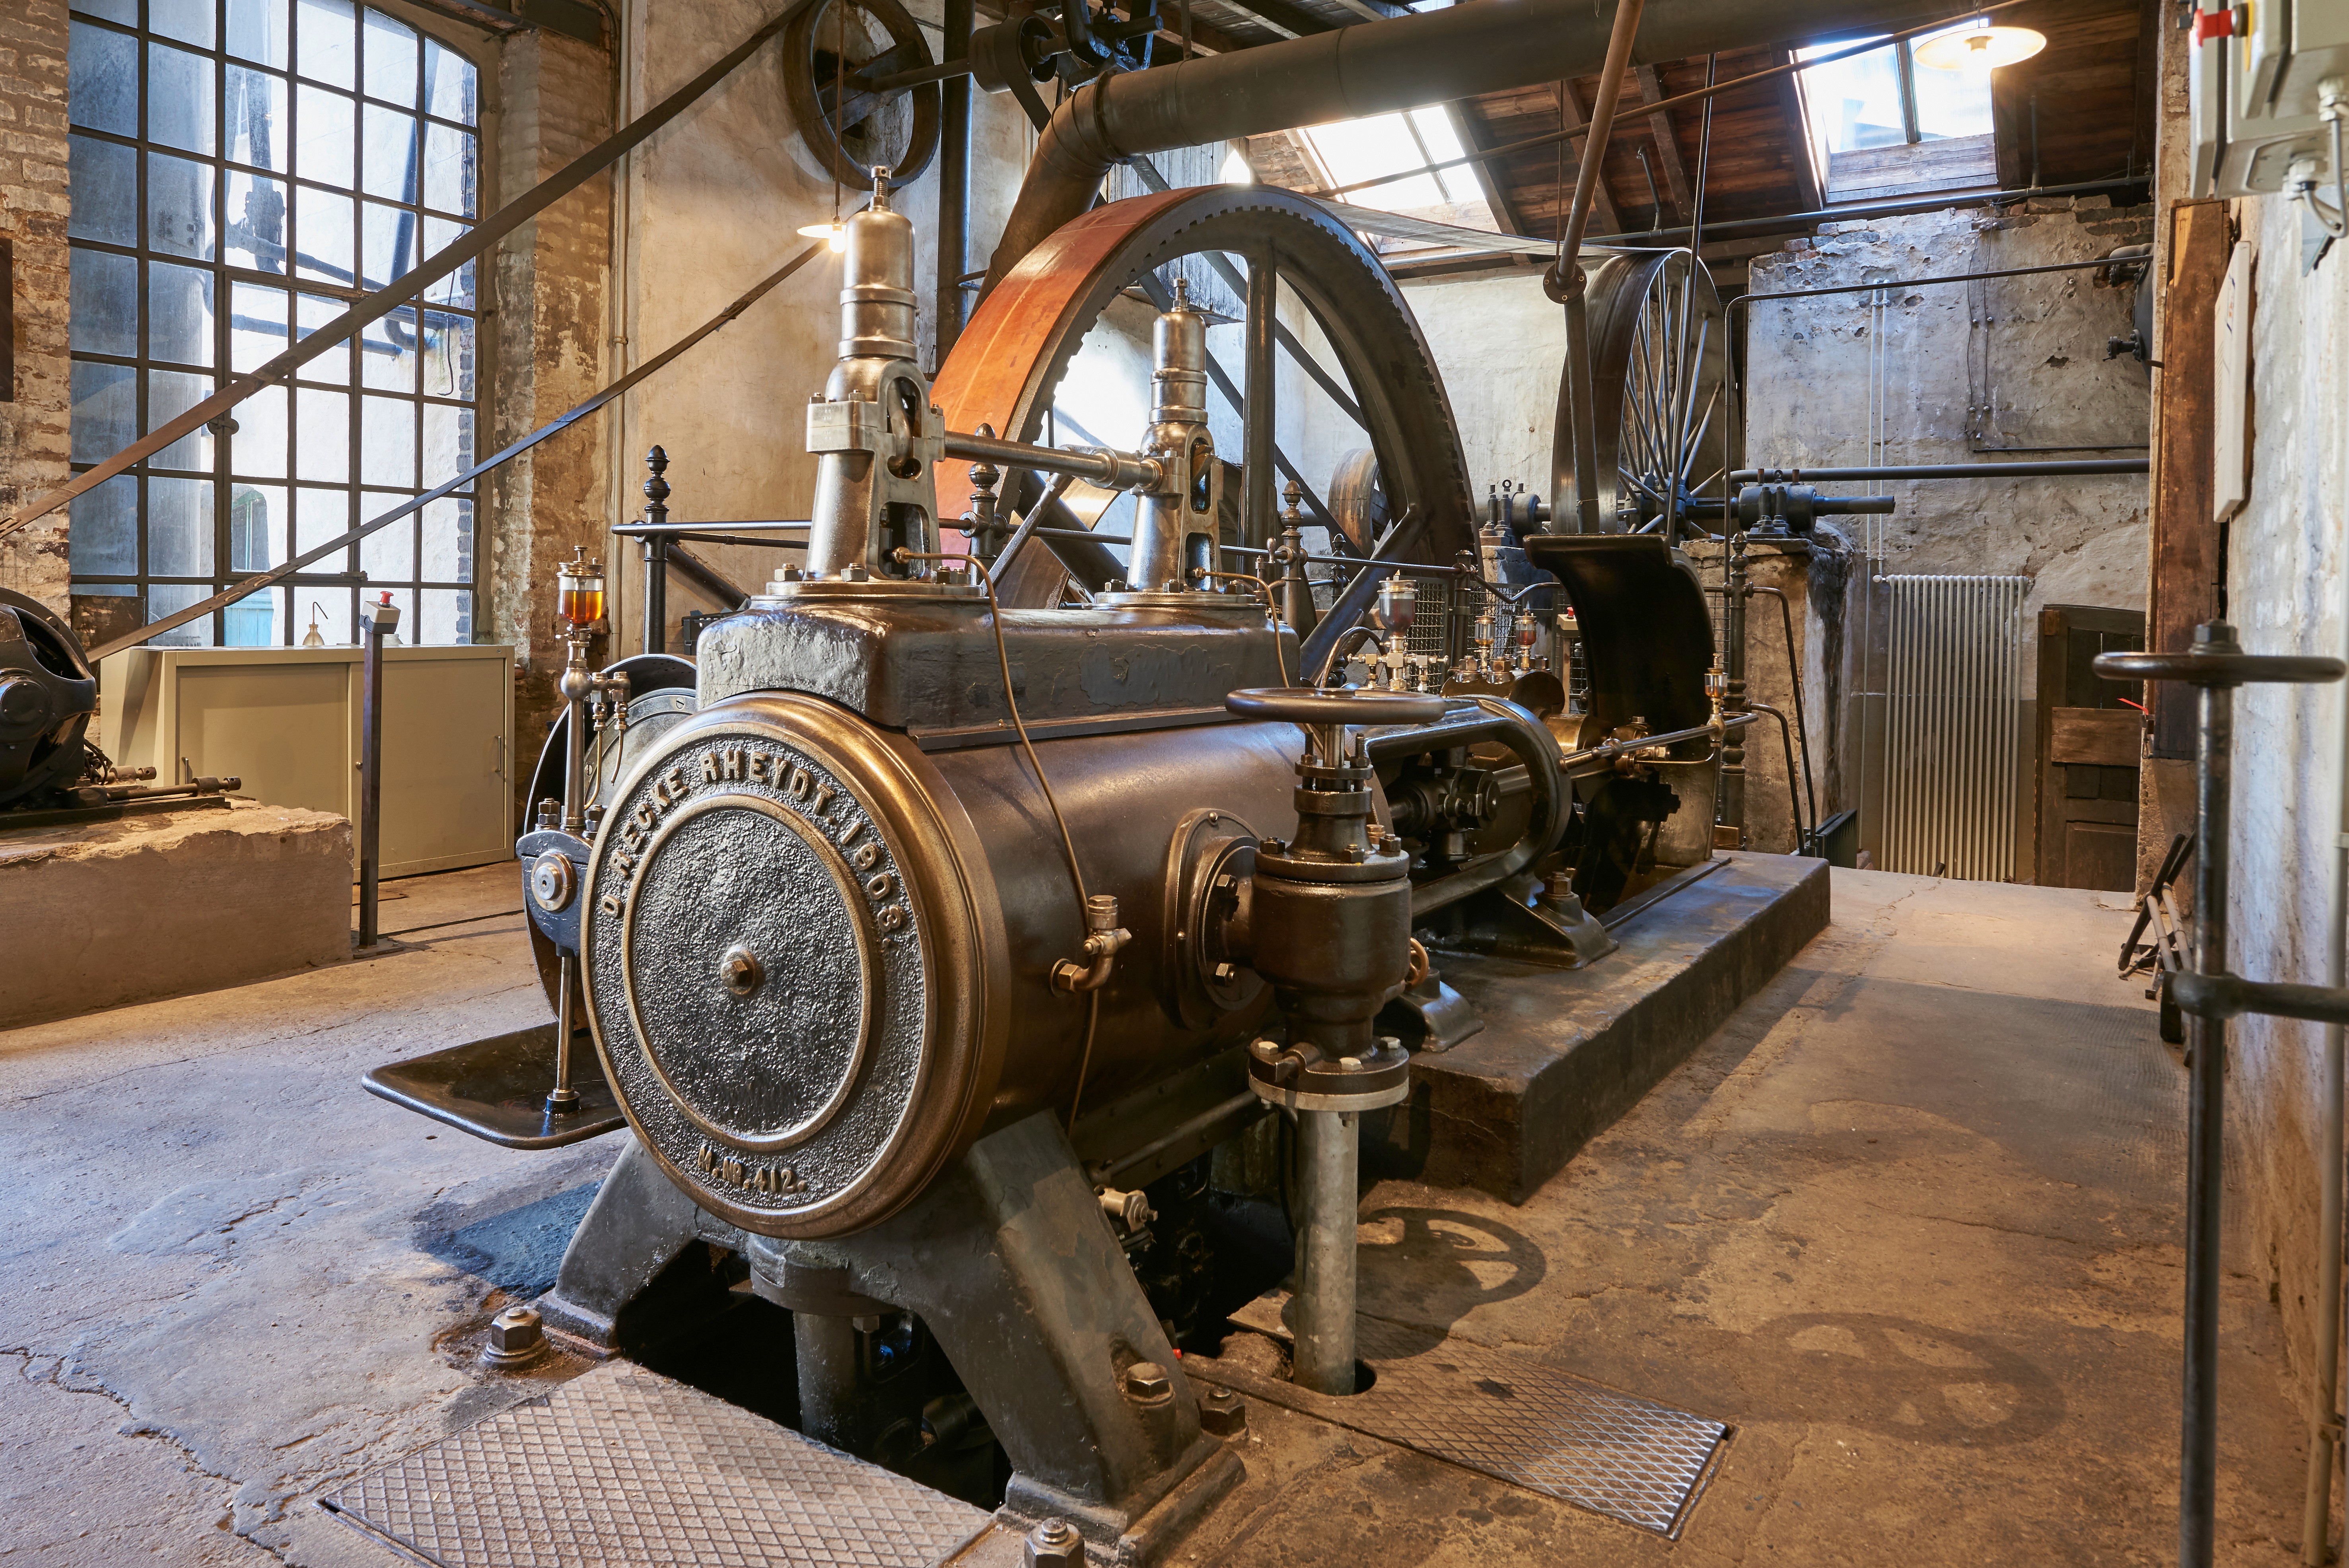 The steam engine dating from the year 1903 powered all the machines until 1961! Once a month – on “Steam Sunday” it can be admired once again at full steam. (Photo: Willi Filz)